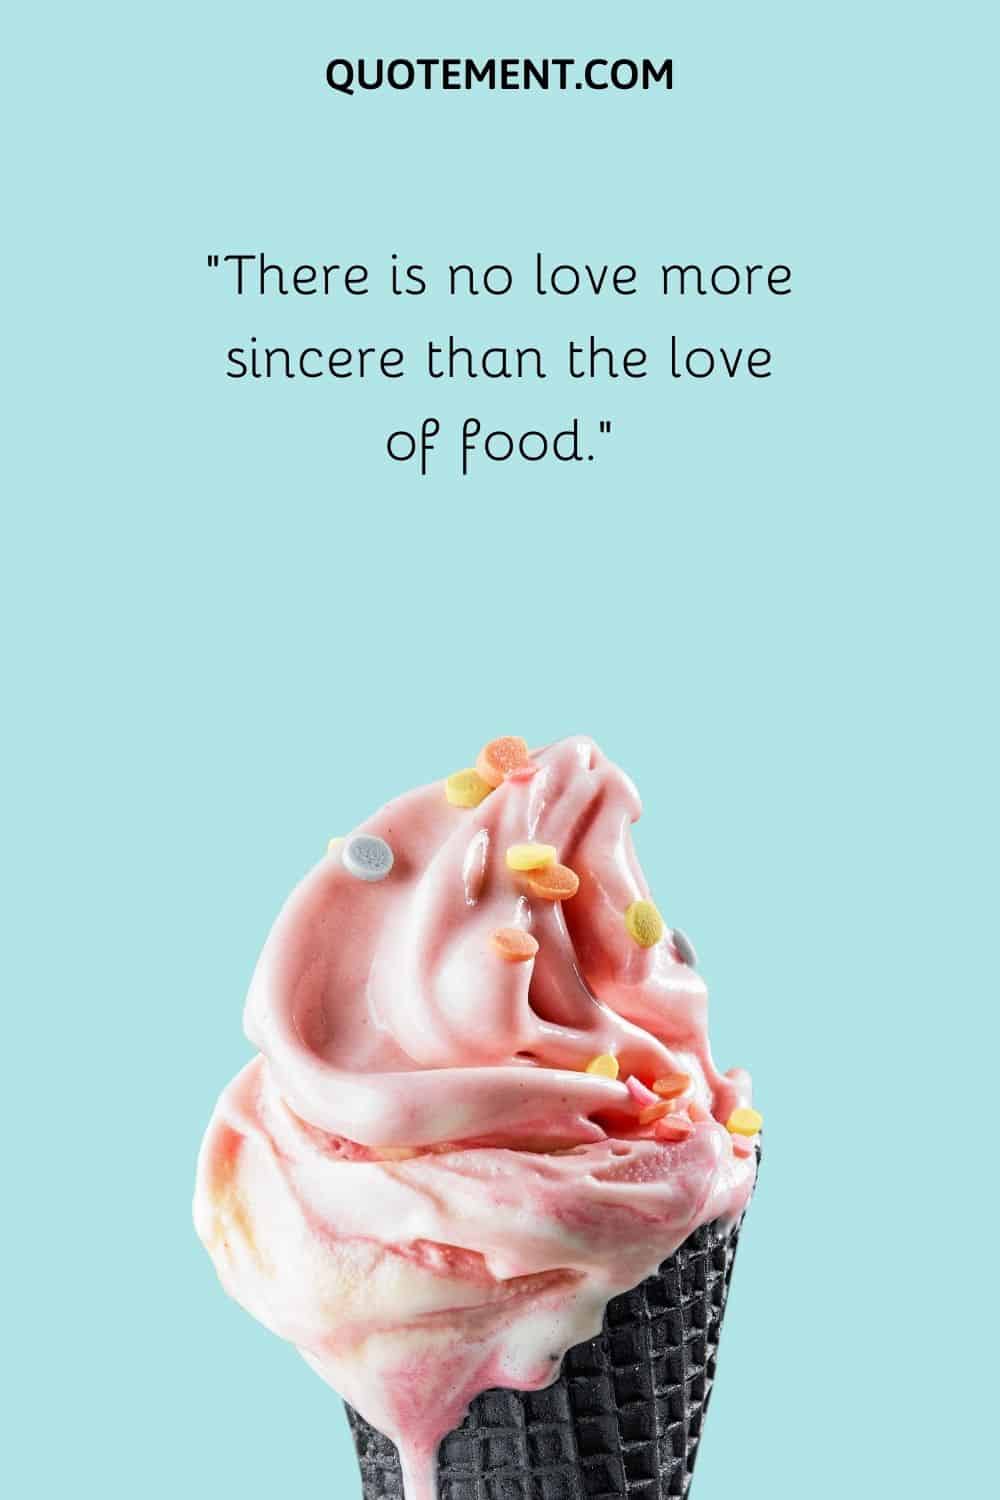 There is no love more sincere than the love of food